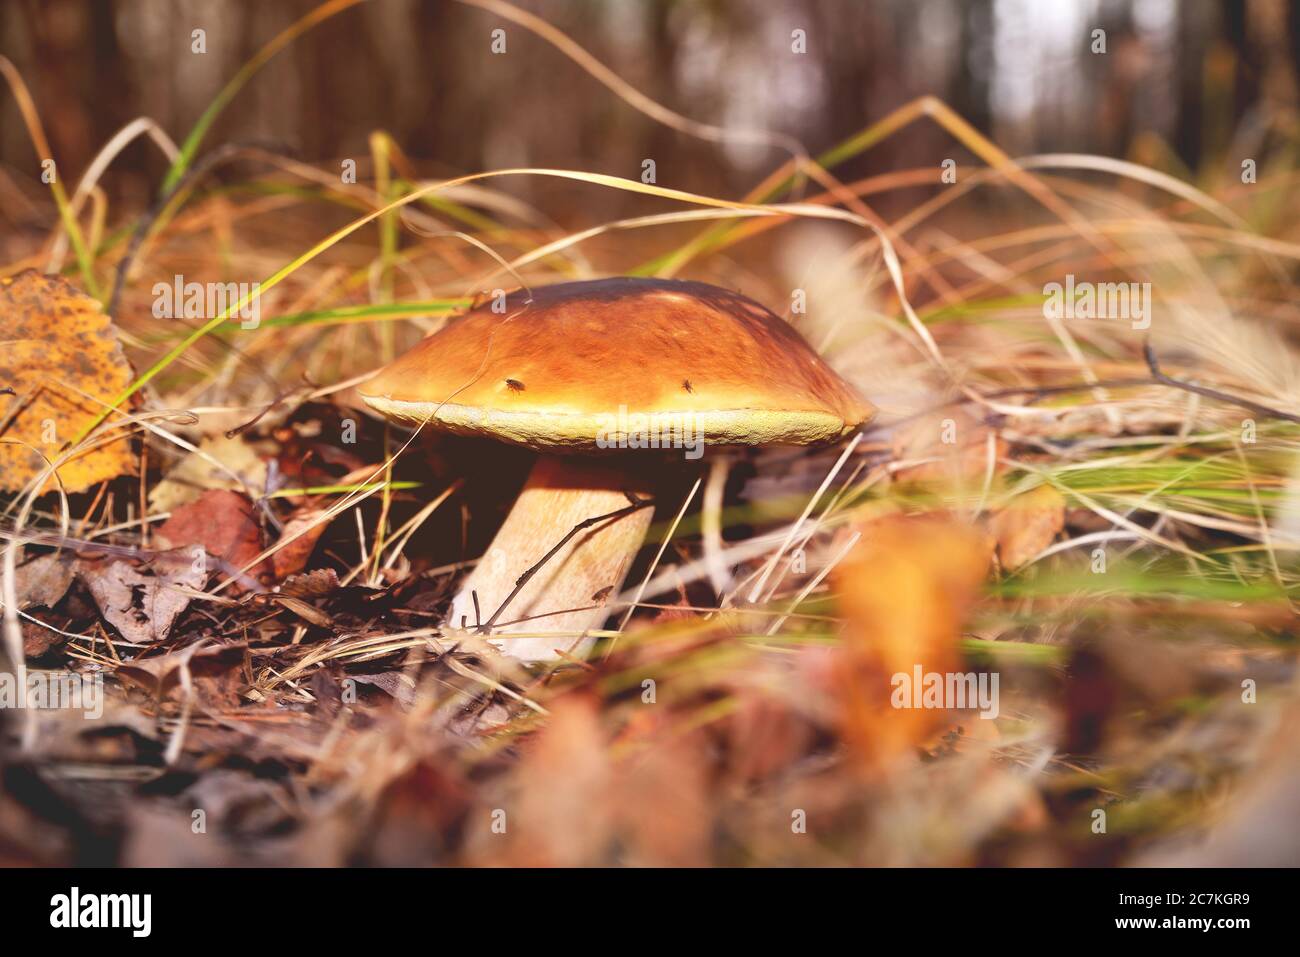 Natural white mushroom growing in a forest in the grass and old withered leaves. Edible mushroom with a brown hat, sunny flare autumn day close-up Stock Photo